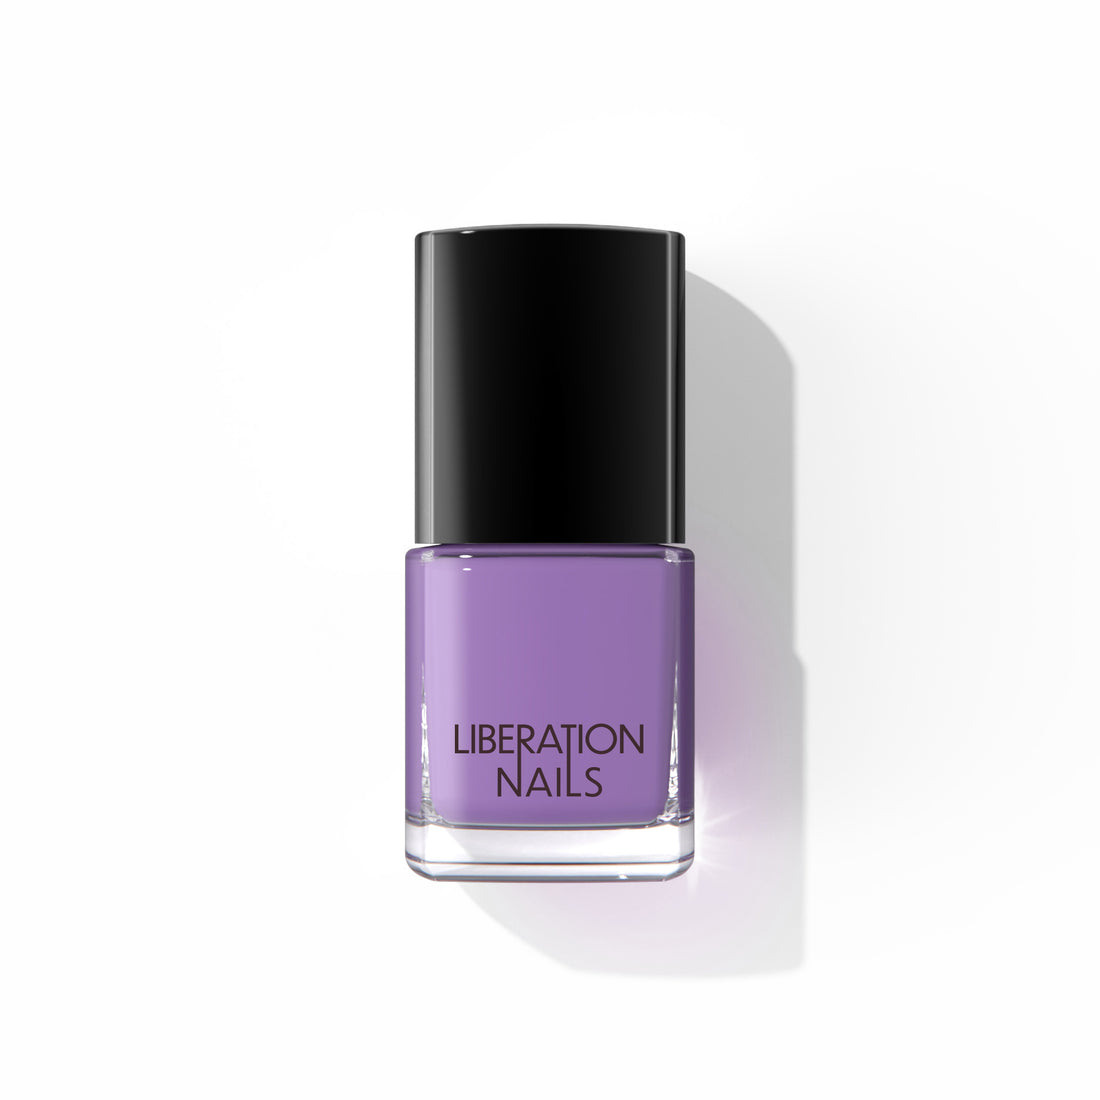 A bottle of Liberation Nails nail polish in a full-bodied purple color, 4th Dimension